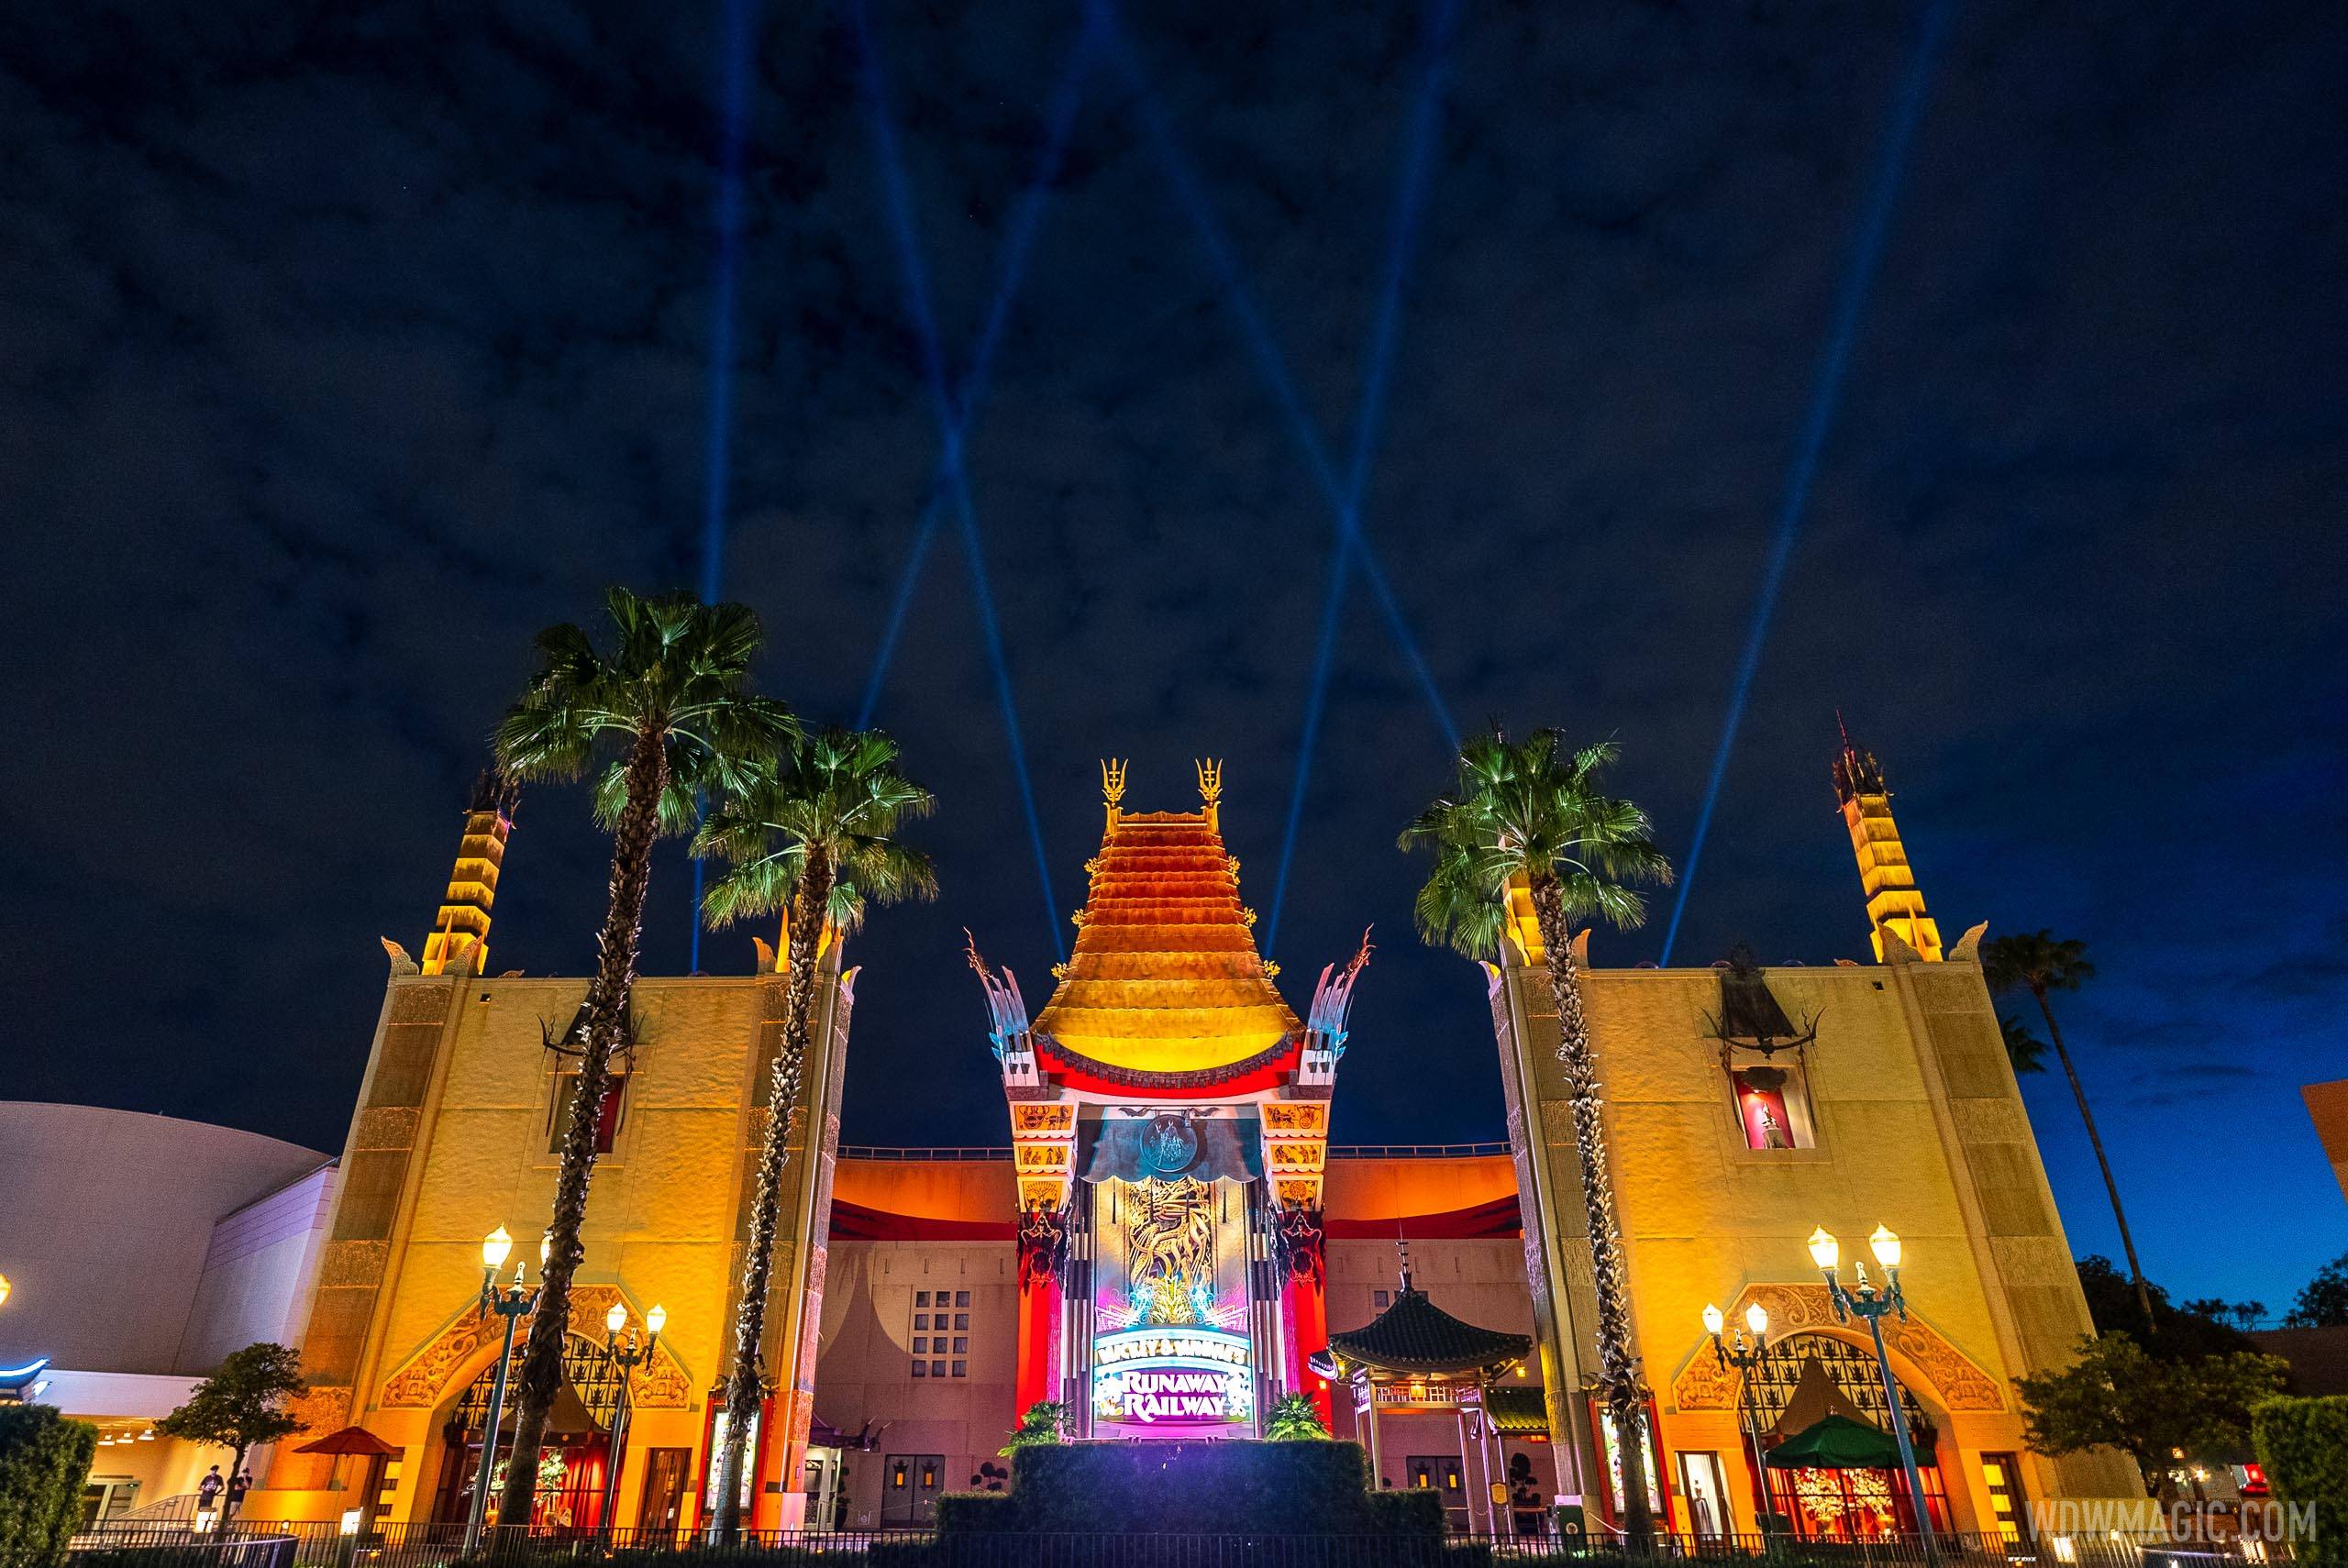 Close-up look at the new Chinese Theatre lighting and searchlights at Disney's Hollywood Studios